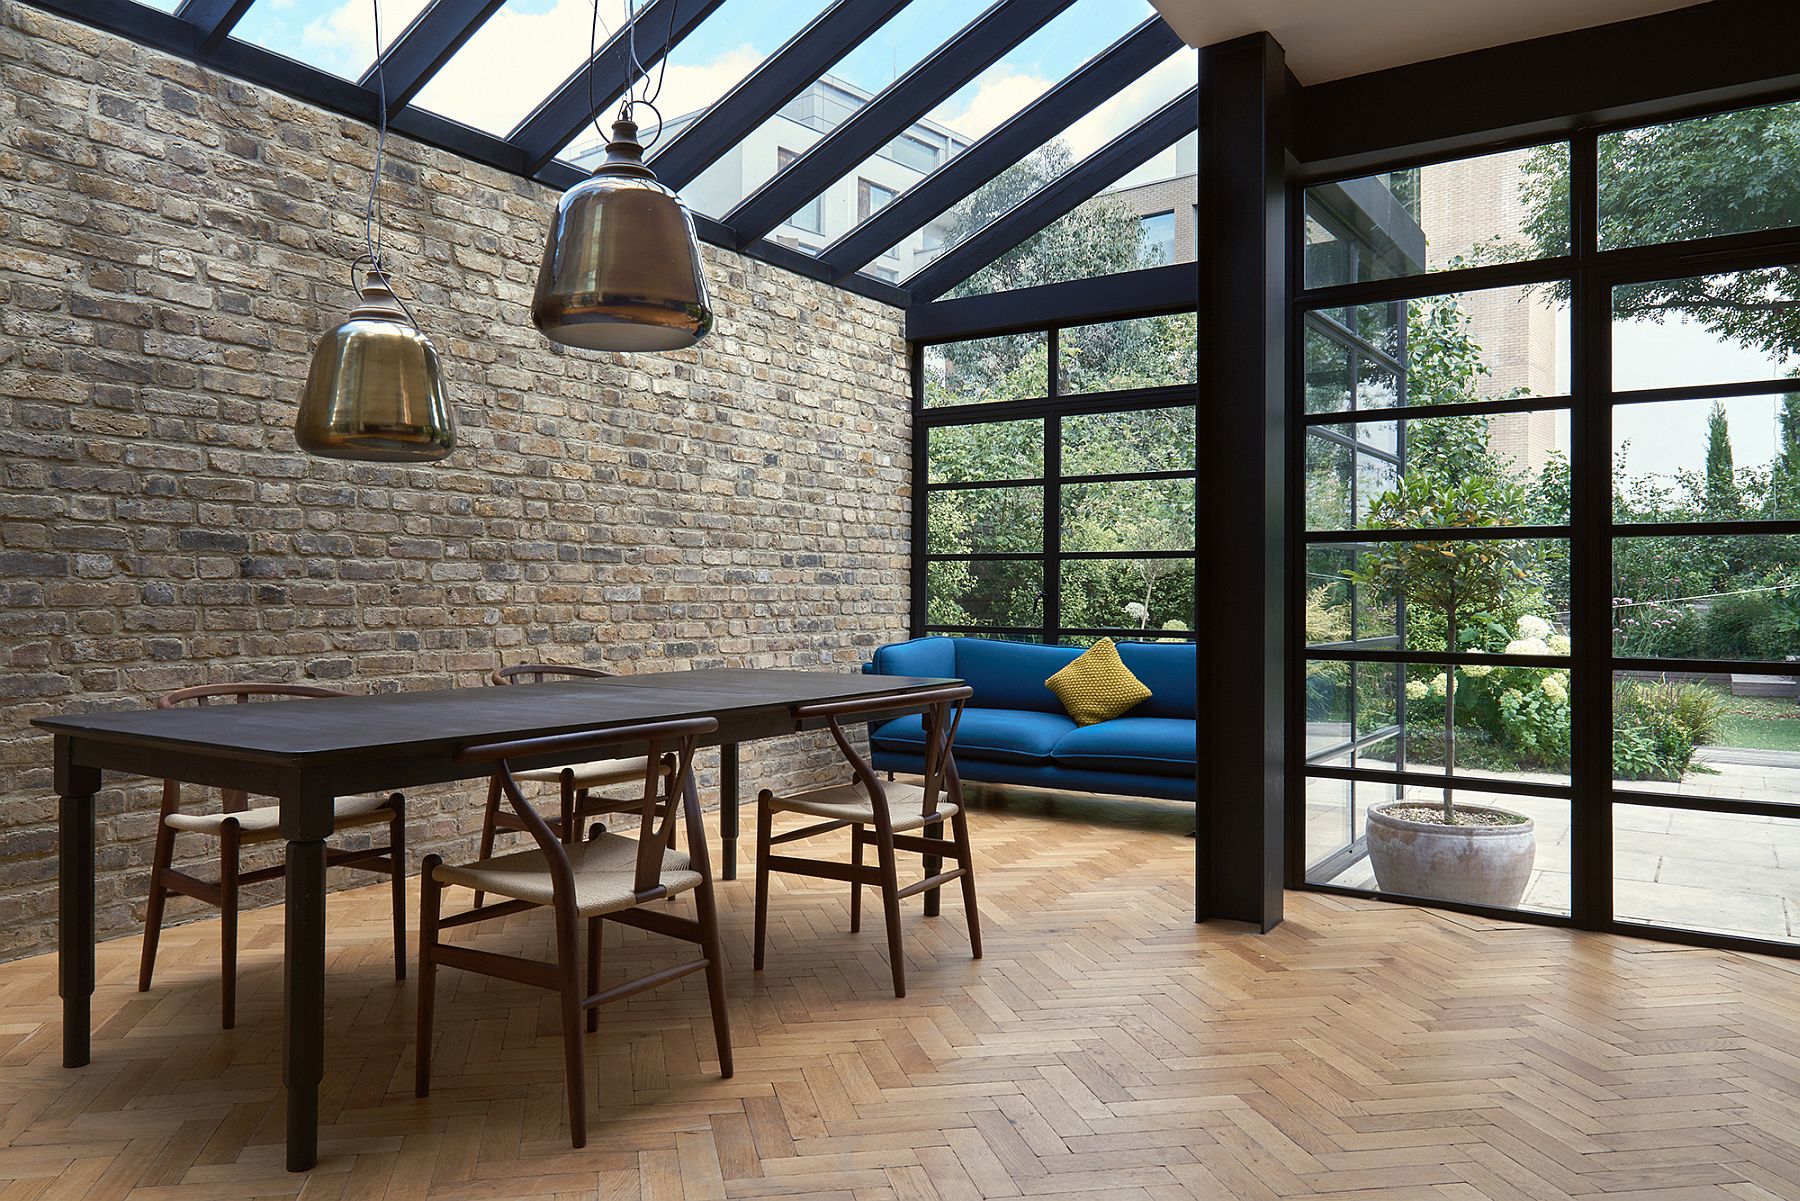 Contemporary dining area with cool pendant lights, brick wall and Crittal windows